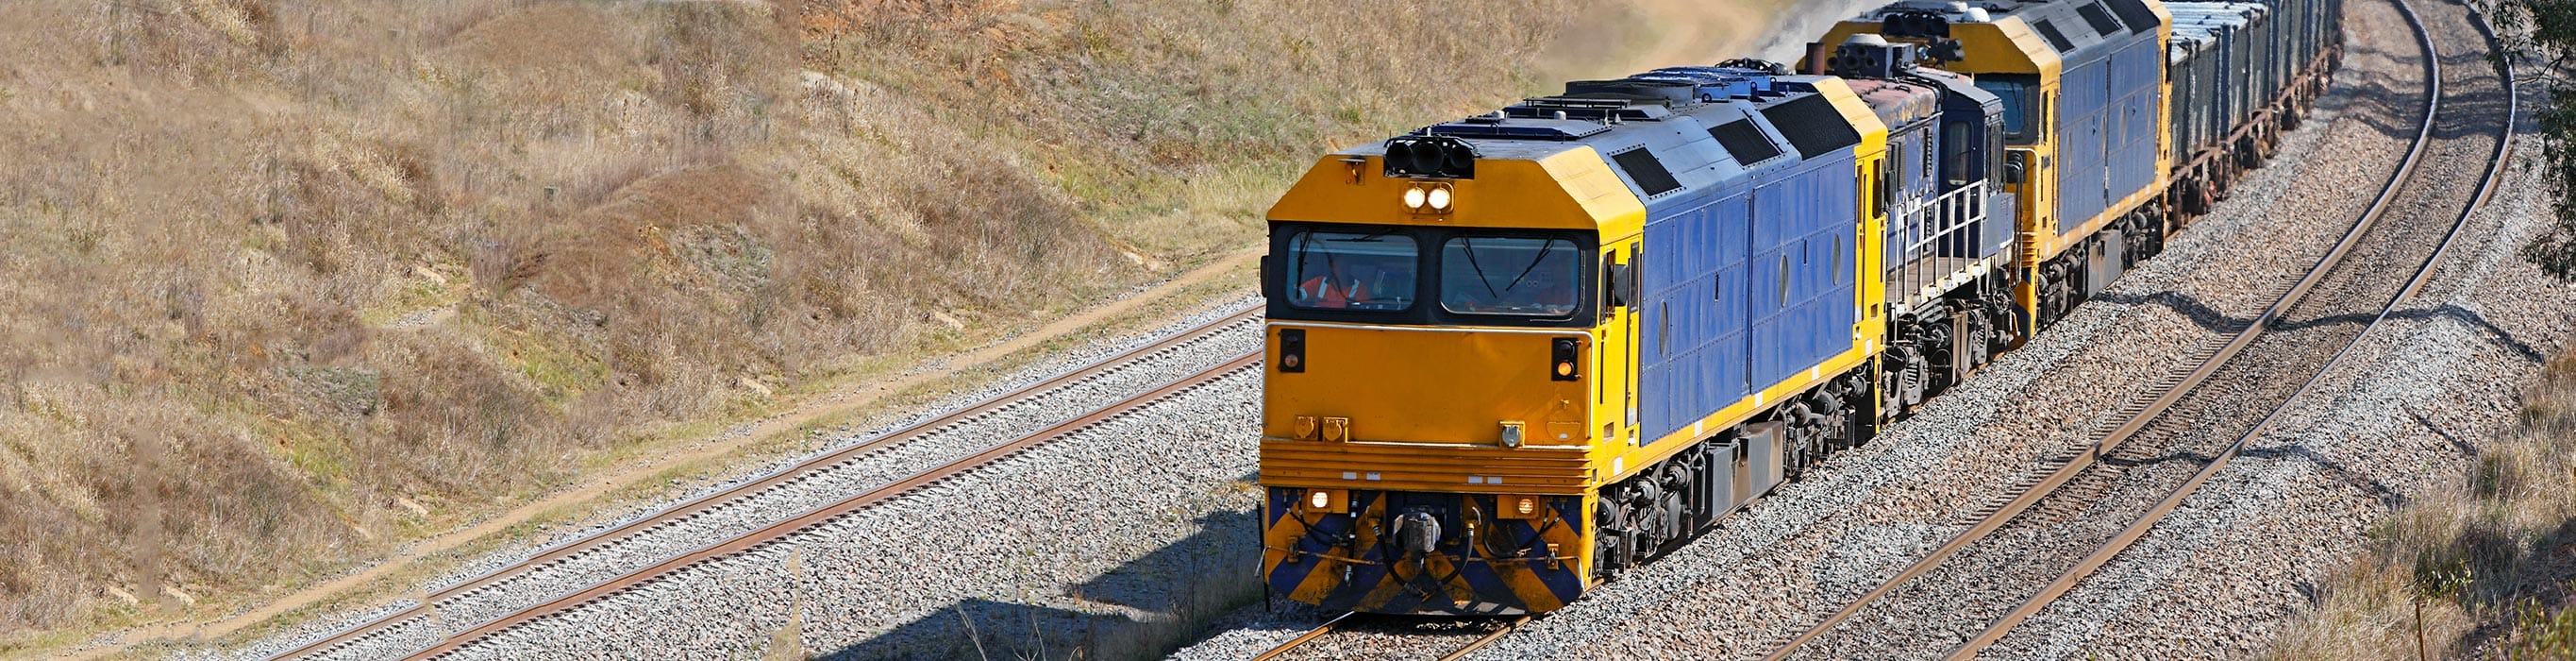 Hydrogen - future for rail vehicles